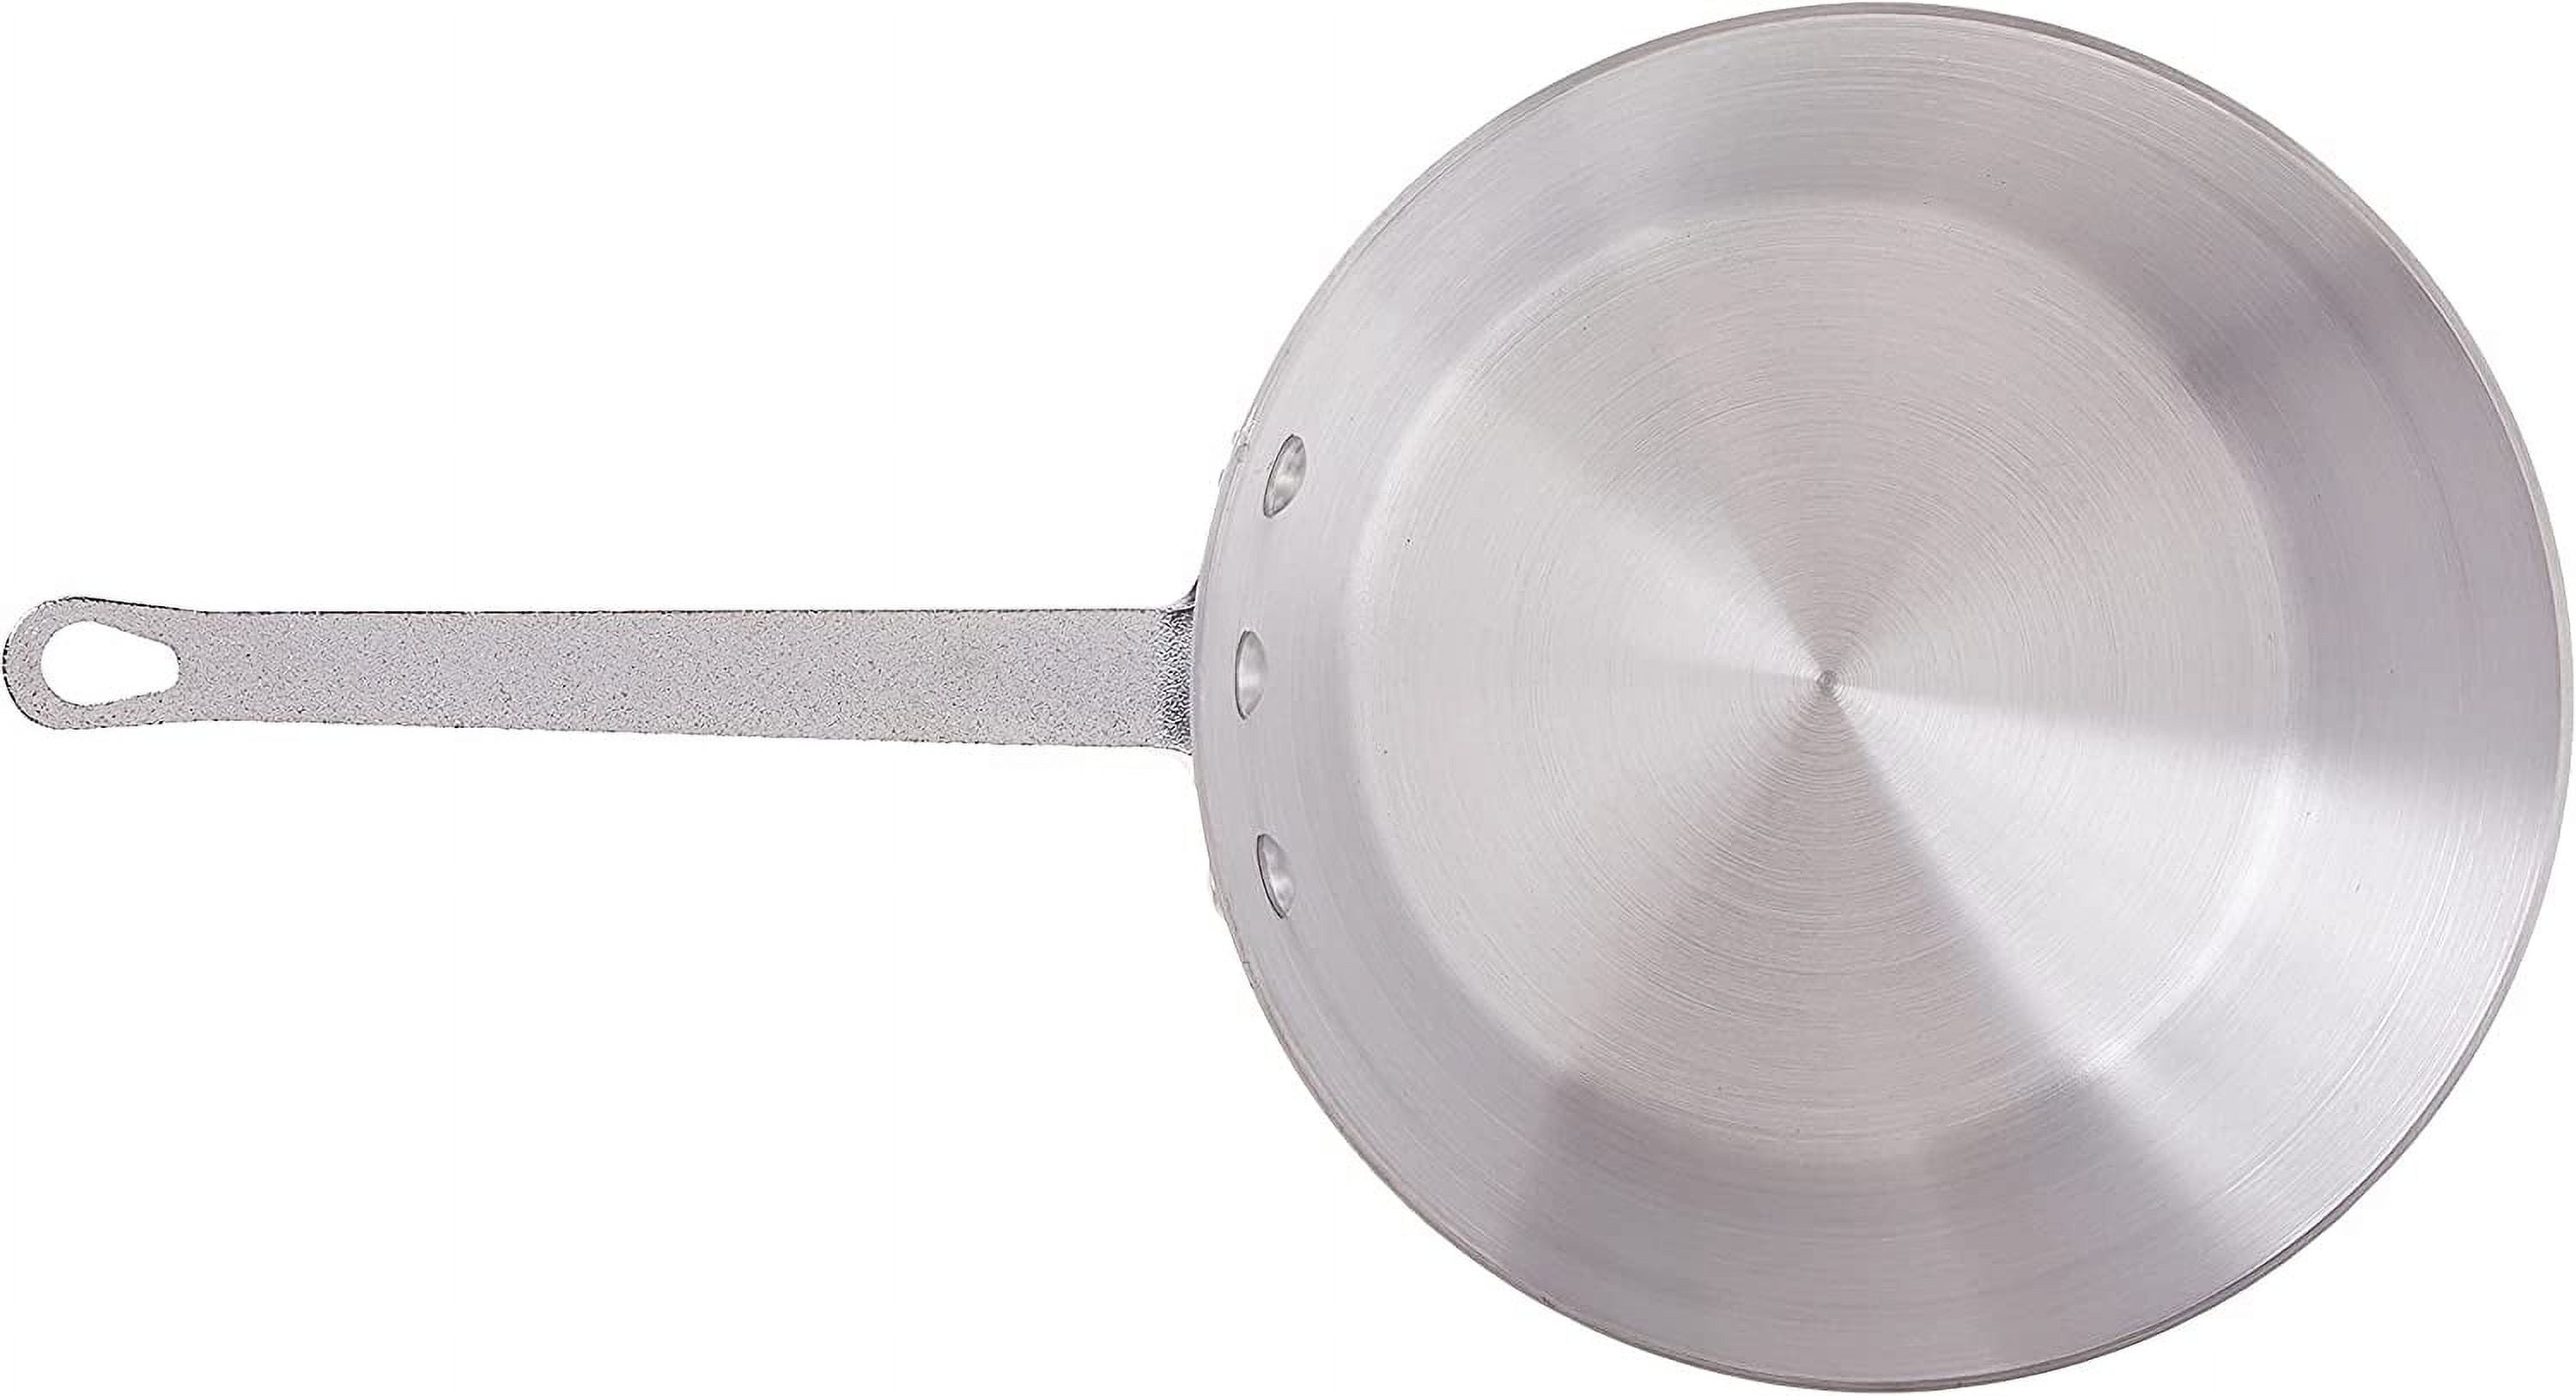 Winco - SAP-2 - 2 qt Stainless Steel Sauce Pan